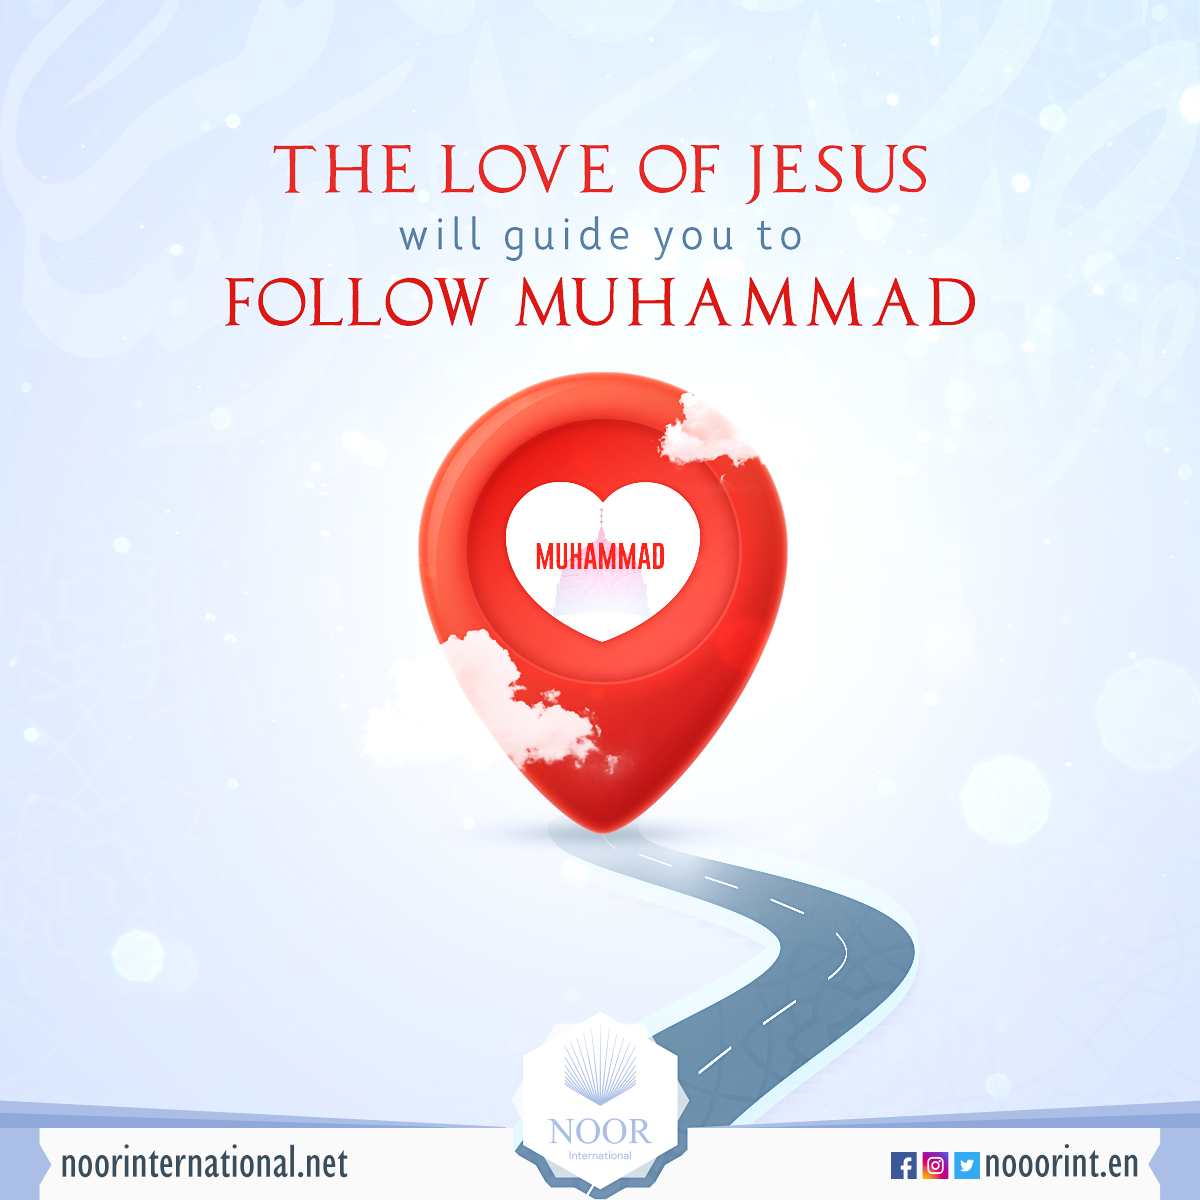 The love of Jesus will guide you to follow Muhammad